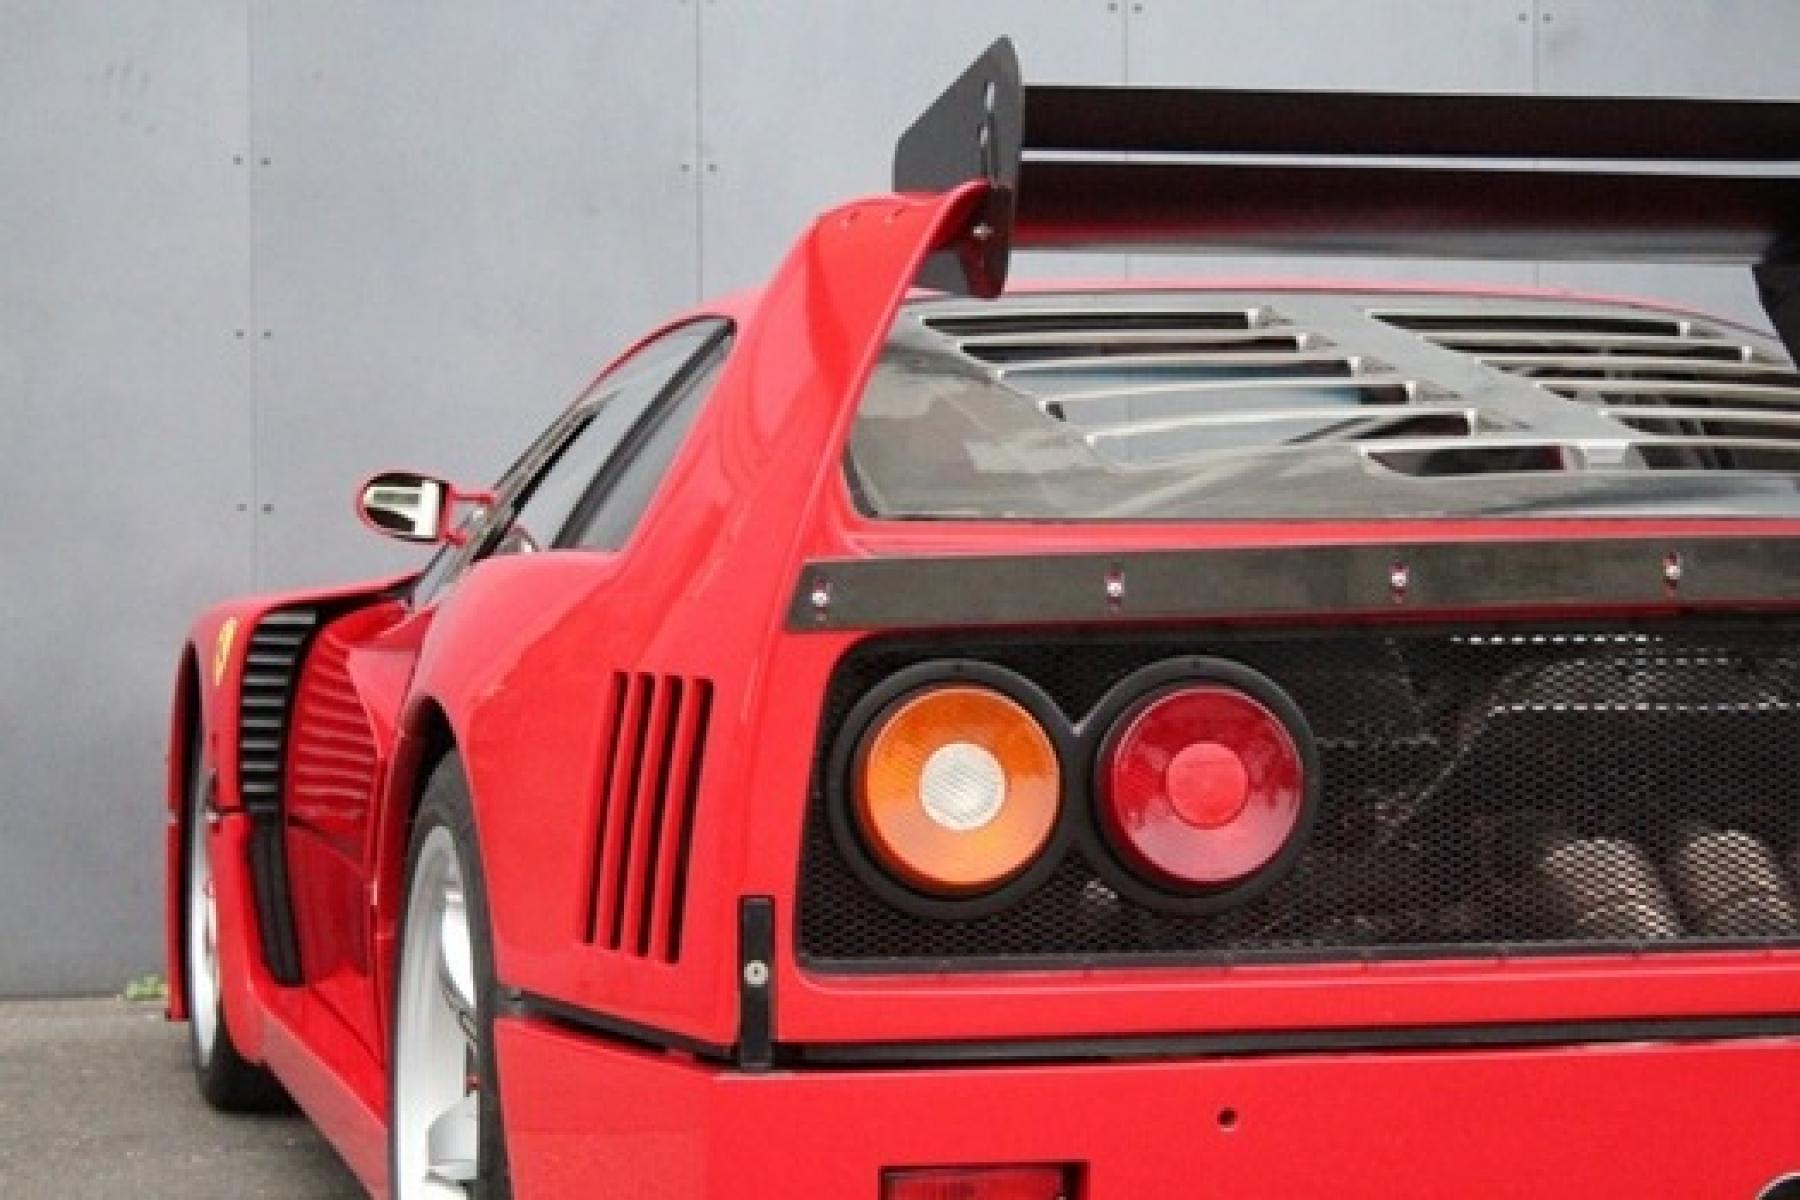 1990 Red Ferrari F40 , 0.000000, 0.000000 - 1990 Ferrari F40 1990 delivered as new in France 1992 delivered to 2nd owner in Japan from France. 2003 current owner All service record from present owner All repaint for refresh perfect skill Exchanged new cutch and master last month, was reupholstered both of the seat new fabric and spong - Photo #5